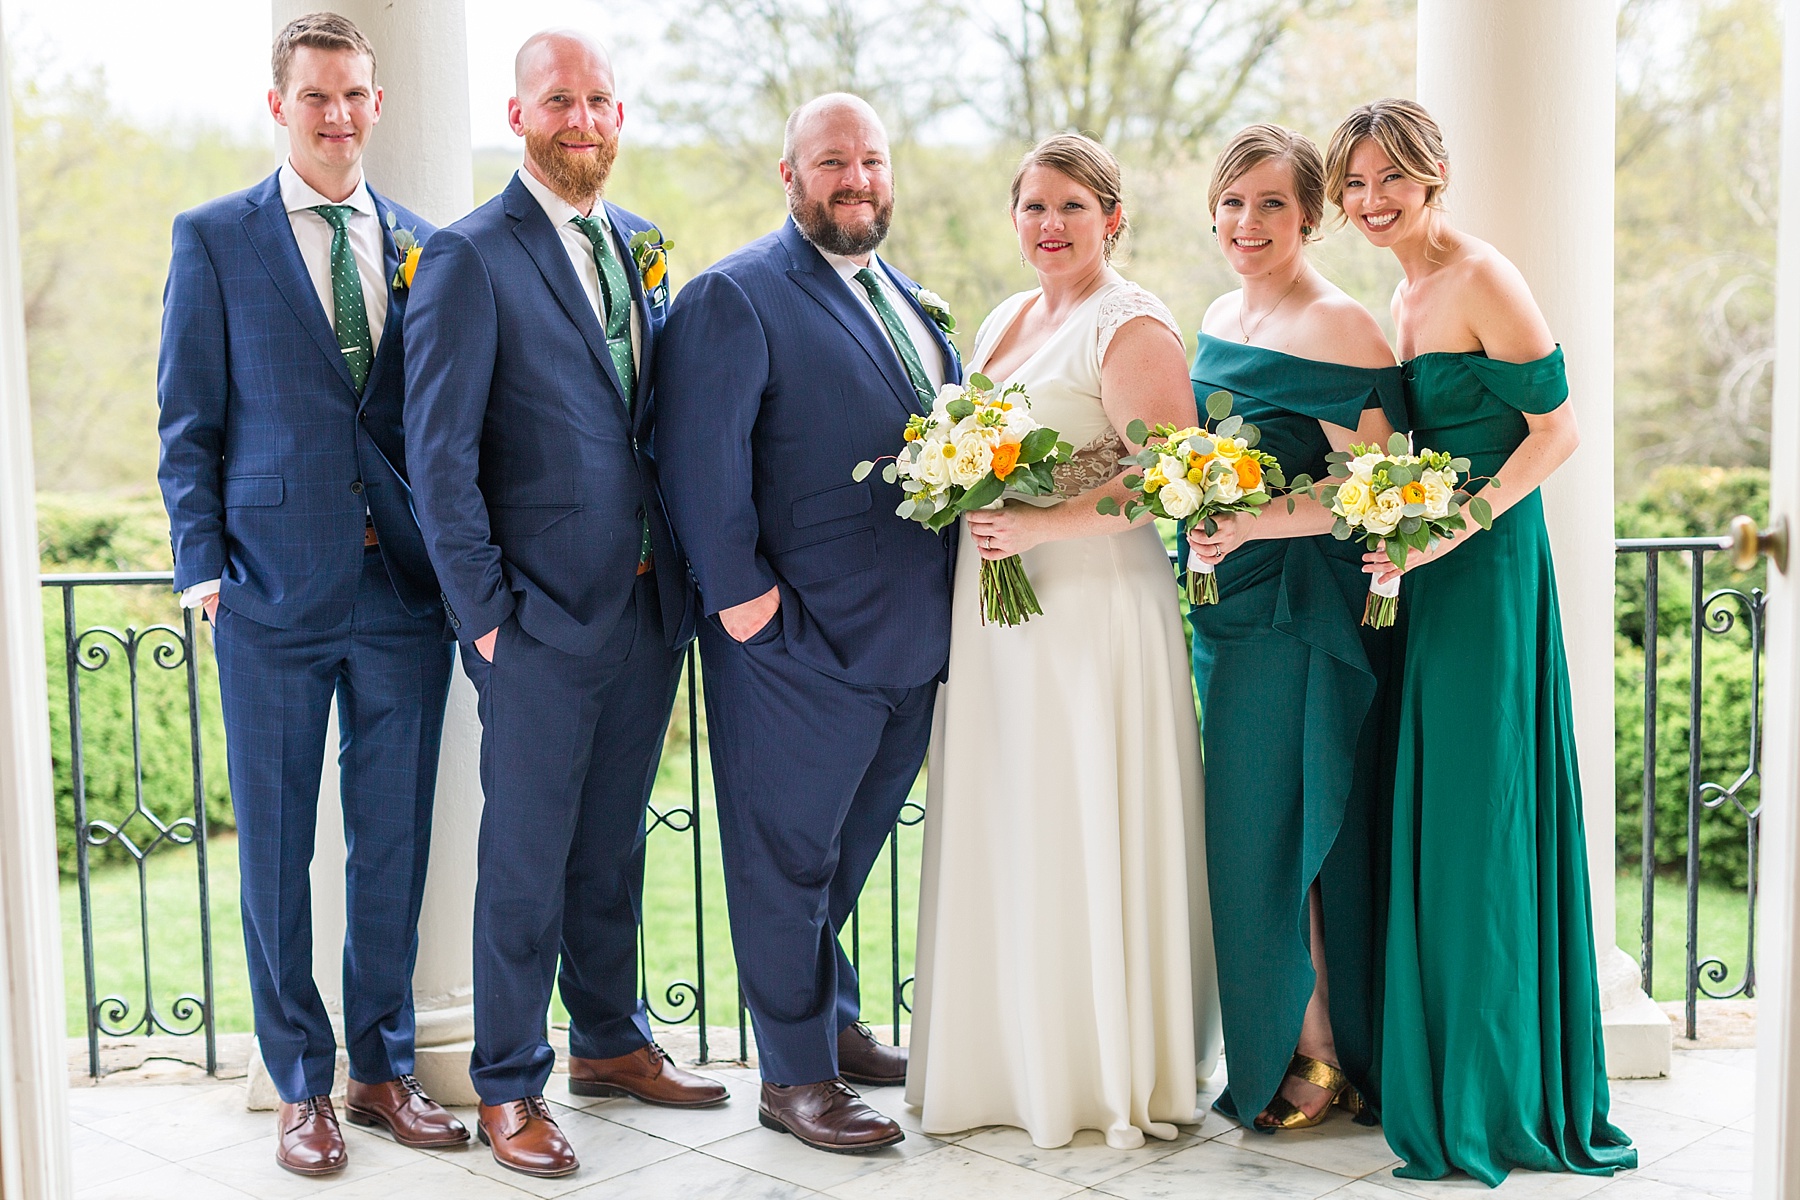 bridal party portraits at Woodlawn + Pope Leighy House with Alexandra Mandato Photography